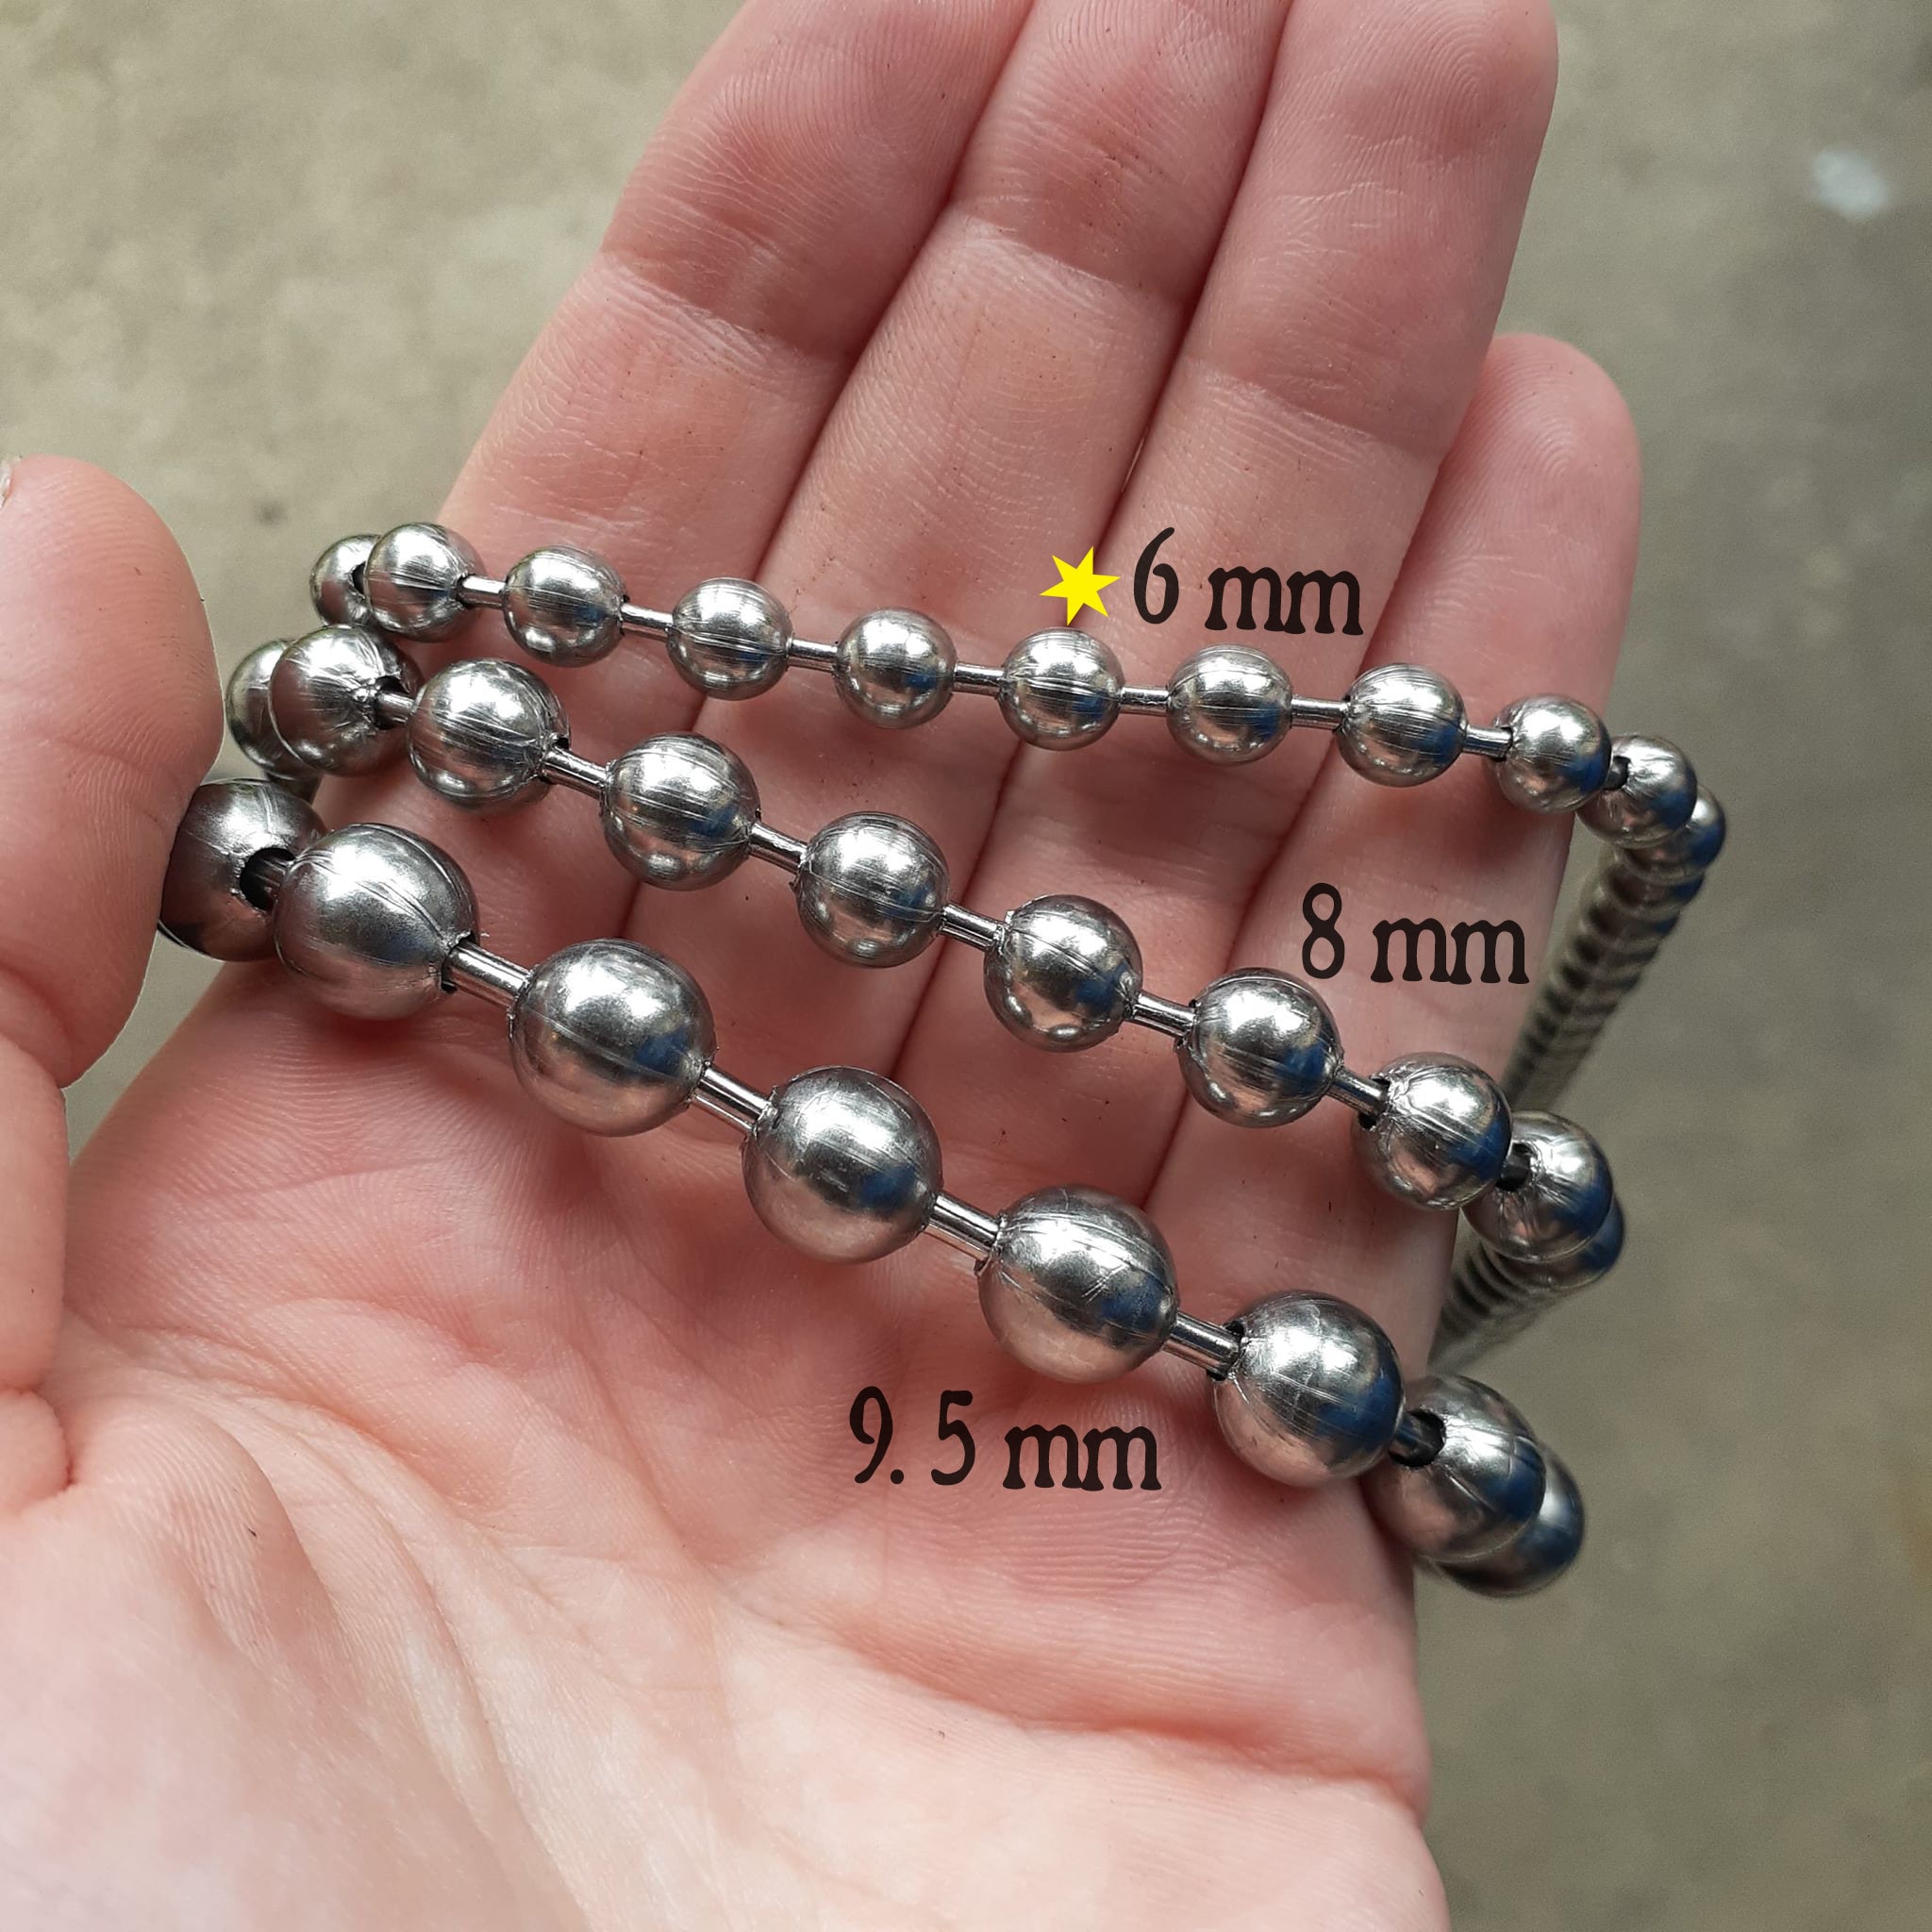 5 m/lot Stainless steel Metal Ball Bead Chains For DIY Necklaces